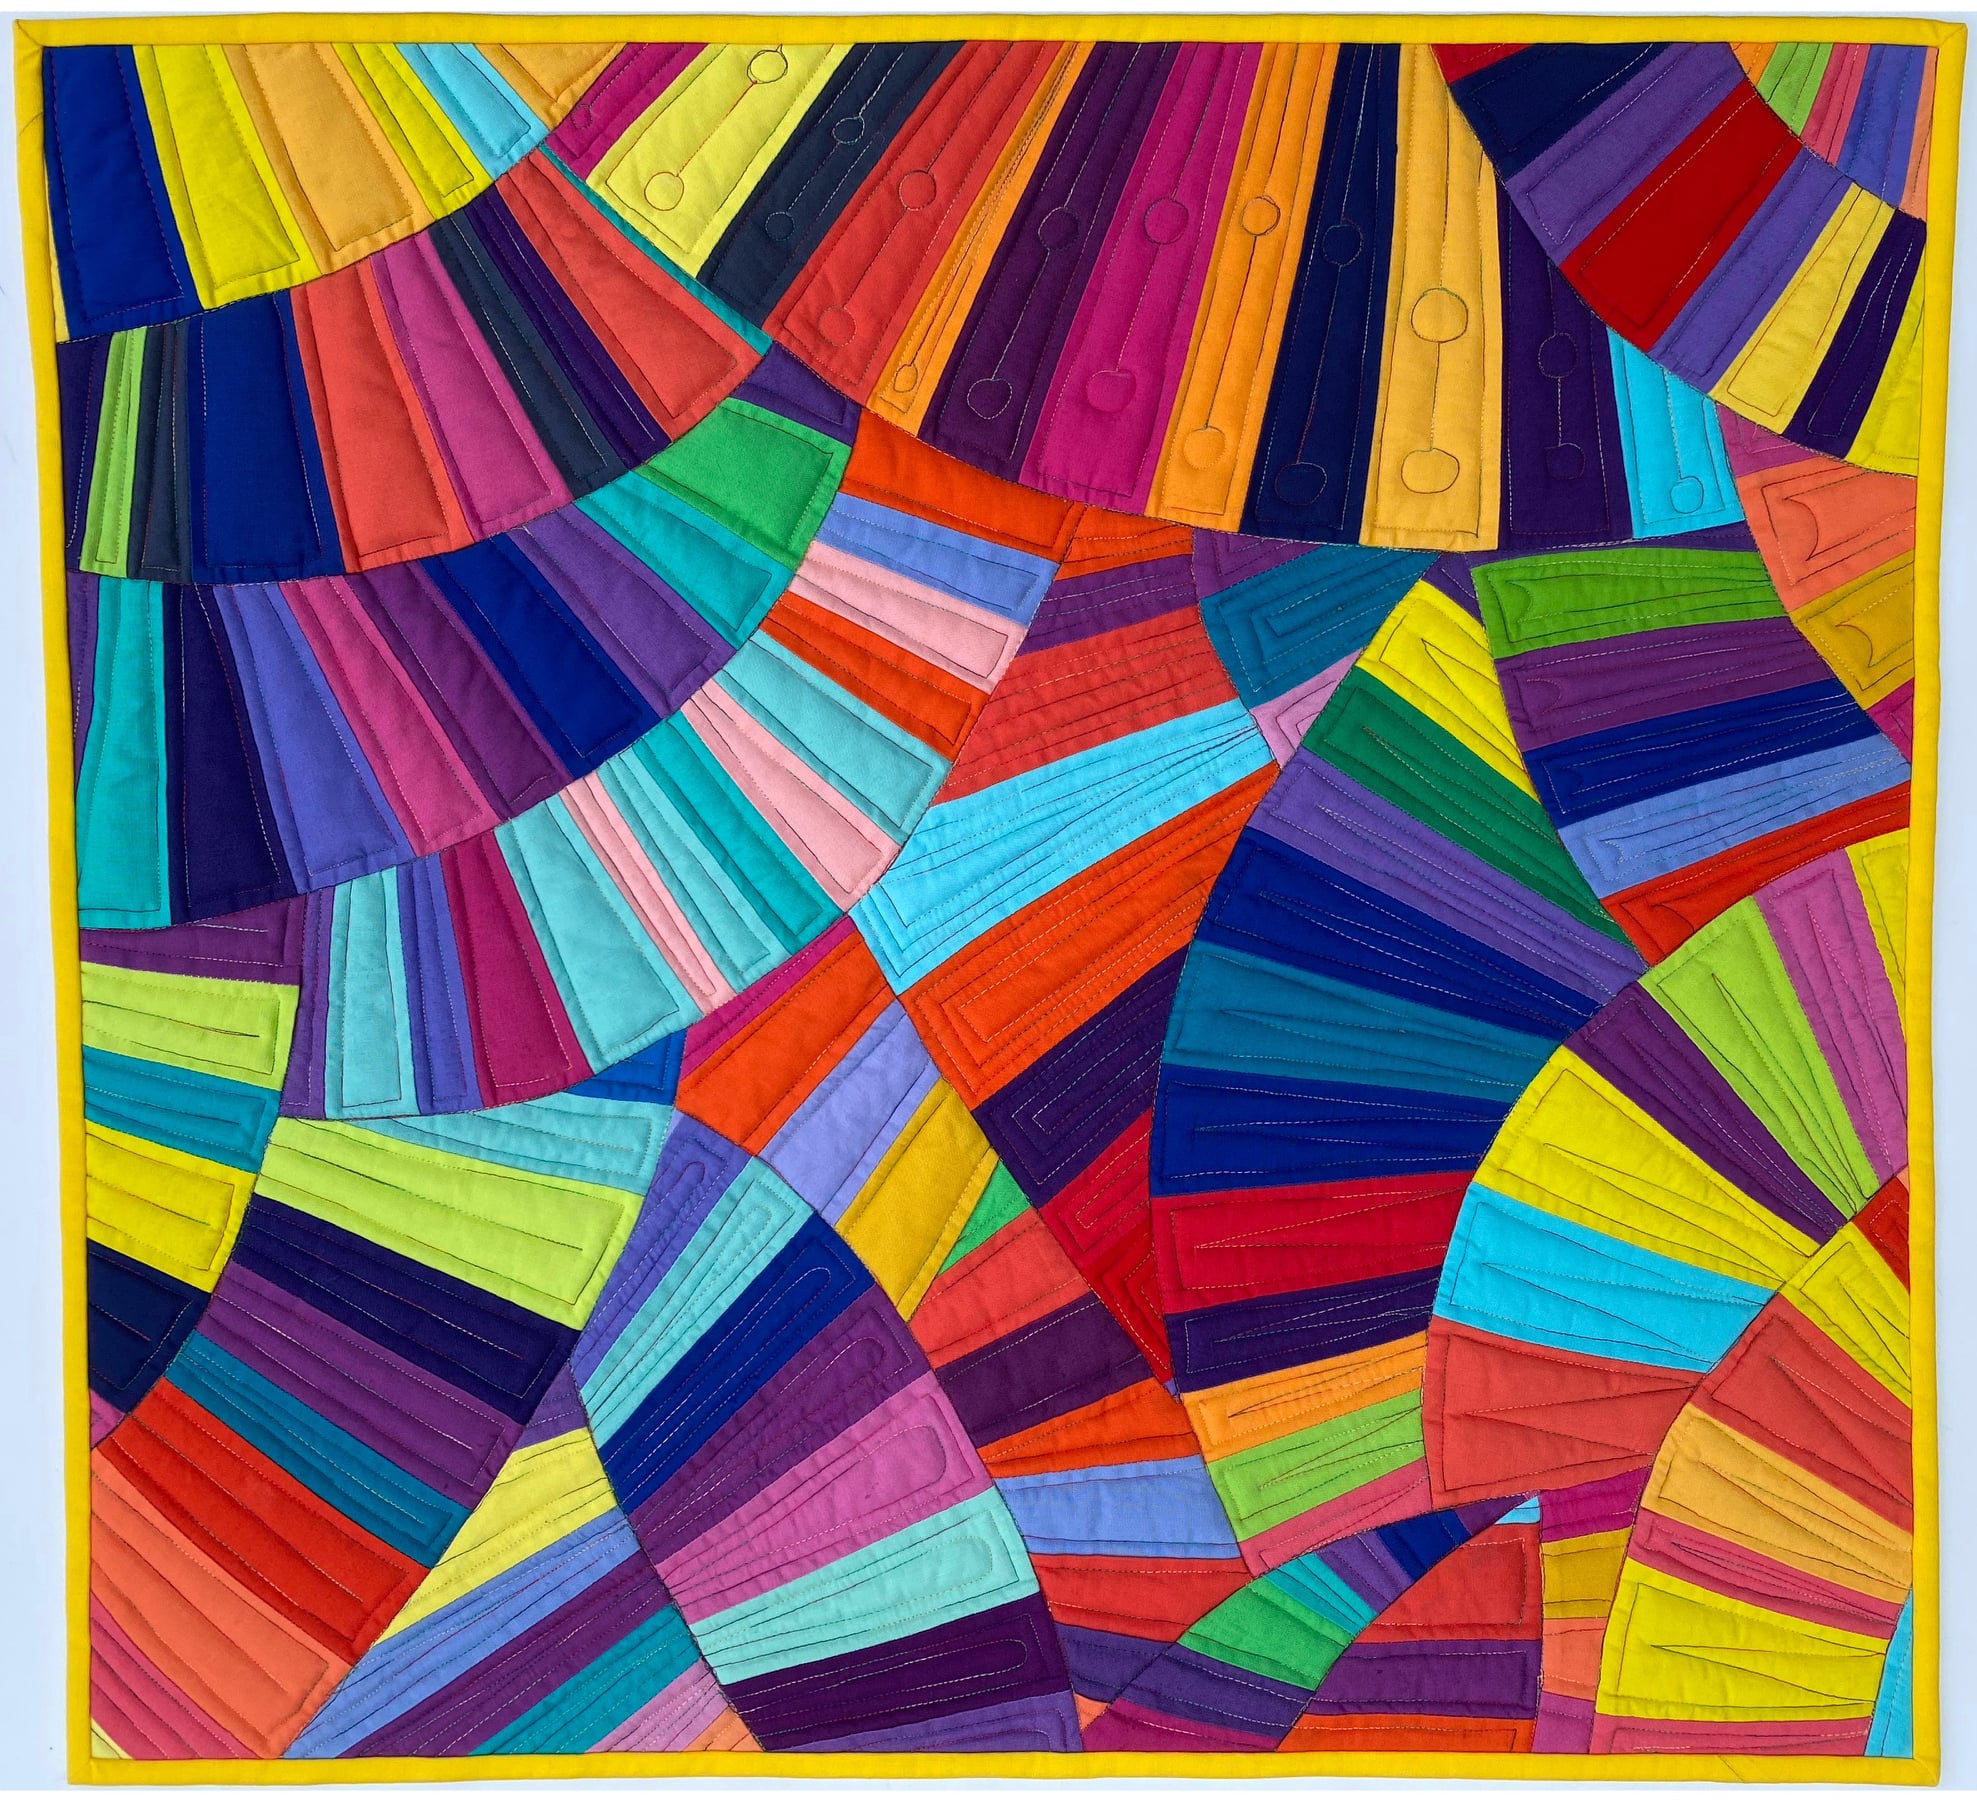 Layers of bright, multicolored fans stitched into a quilt